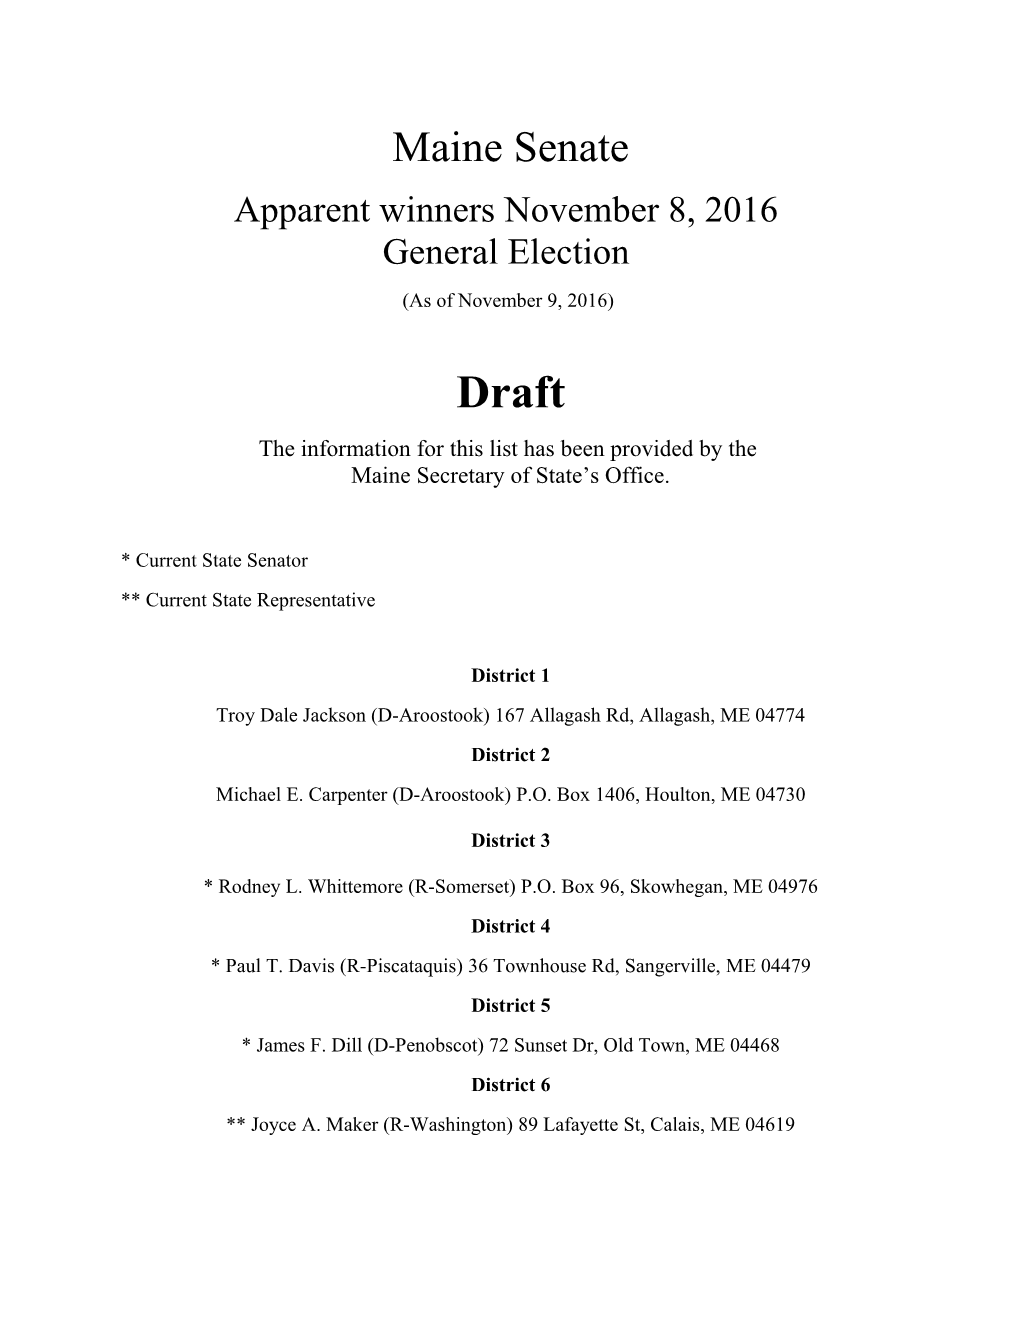 Apparent Winners November 8, 2016 General Election